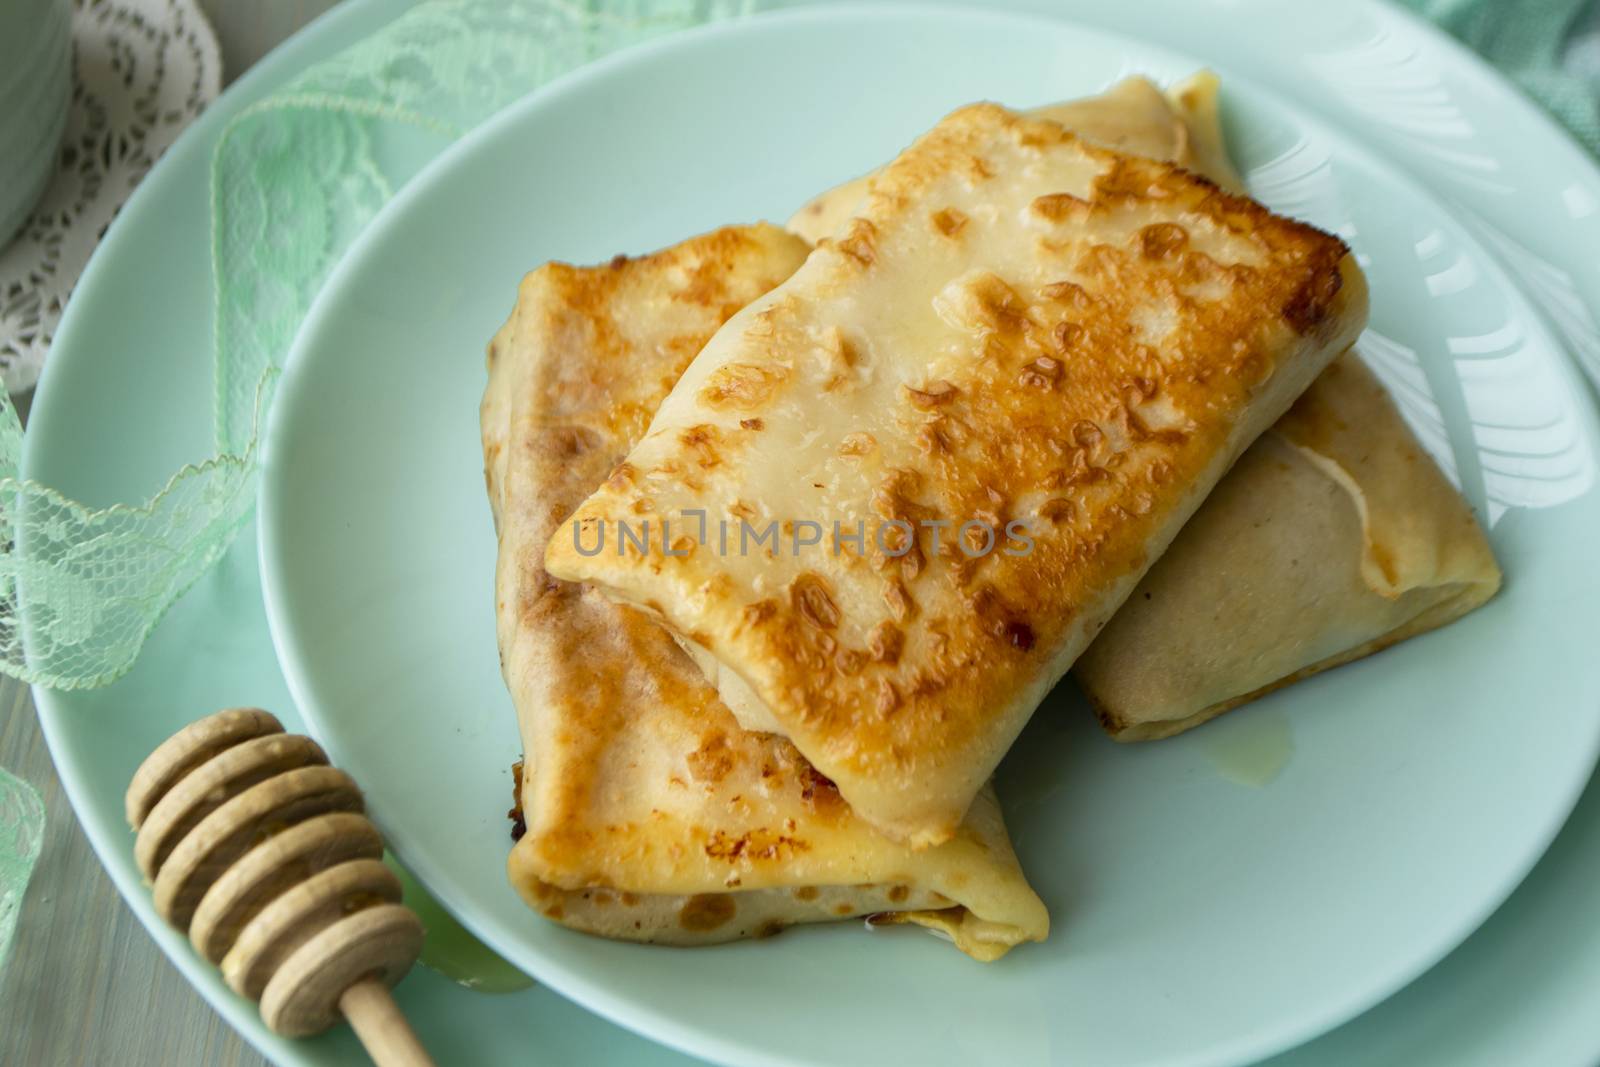 Crepes stuffed with apple on turquoise plate close up